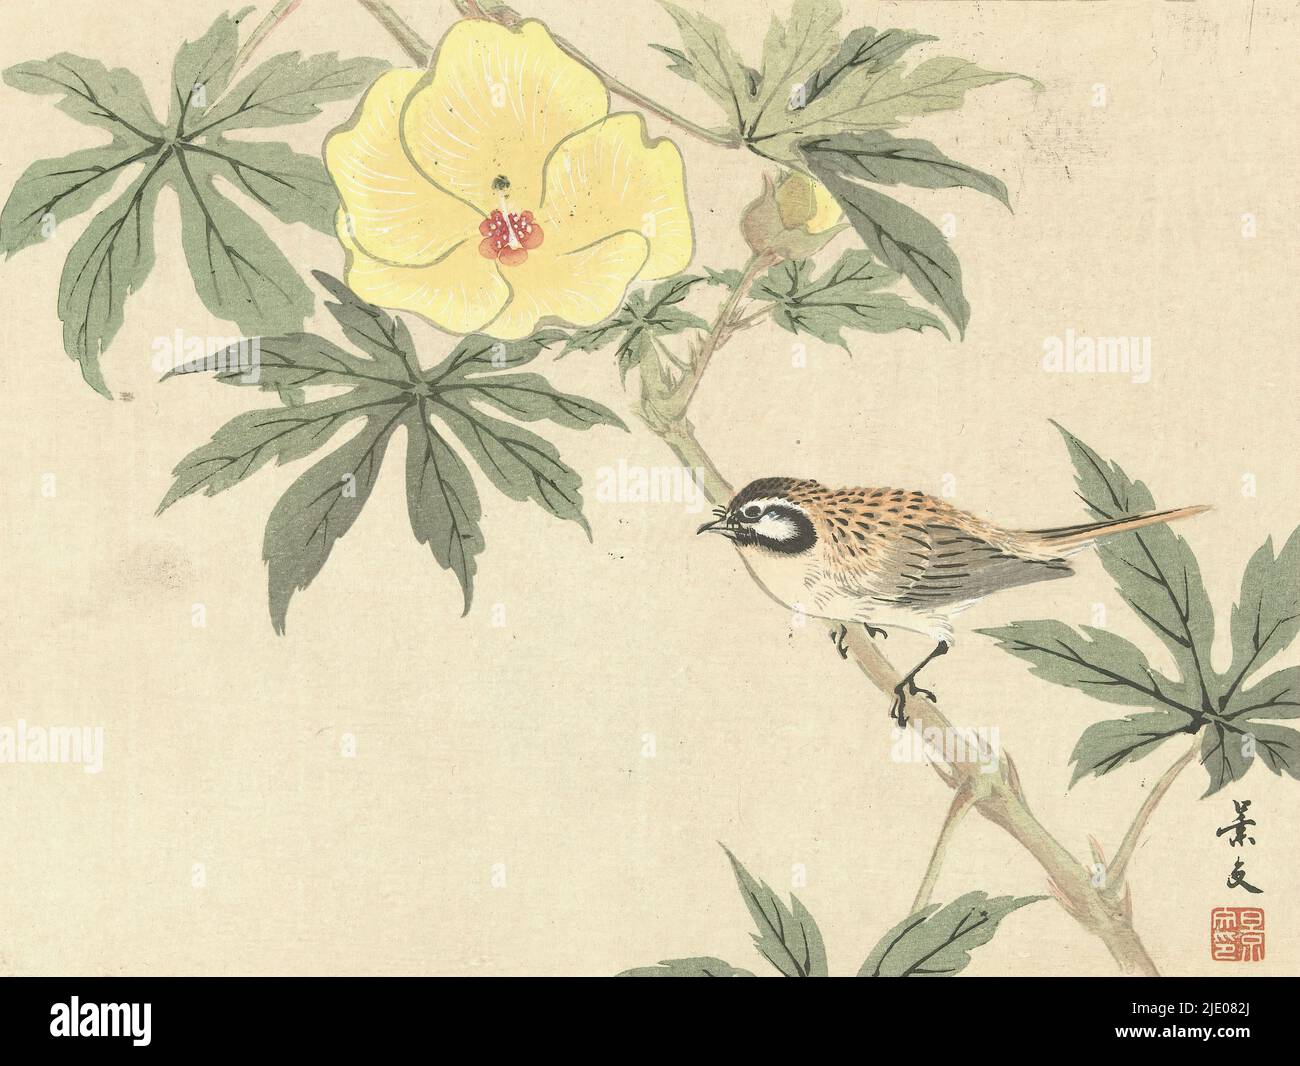 Bird on branch with yellow flower, Floral and bird sketches from Keibun- part three (series title), Keibun kacho gafu kohen (series title on object), print maker: Matsumura Keibun, (mentioned on object), printer: Aoki Kôsaburô, publisher: Aoki Kôsaburô, (mentioned on object), print maker: Japan, printer: Osaka, publisher: Osaka, Oct-1892, paper, color woodcut, height 209 mm × width 270 mm Stock Photo